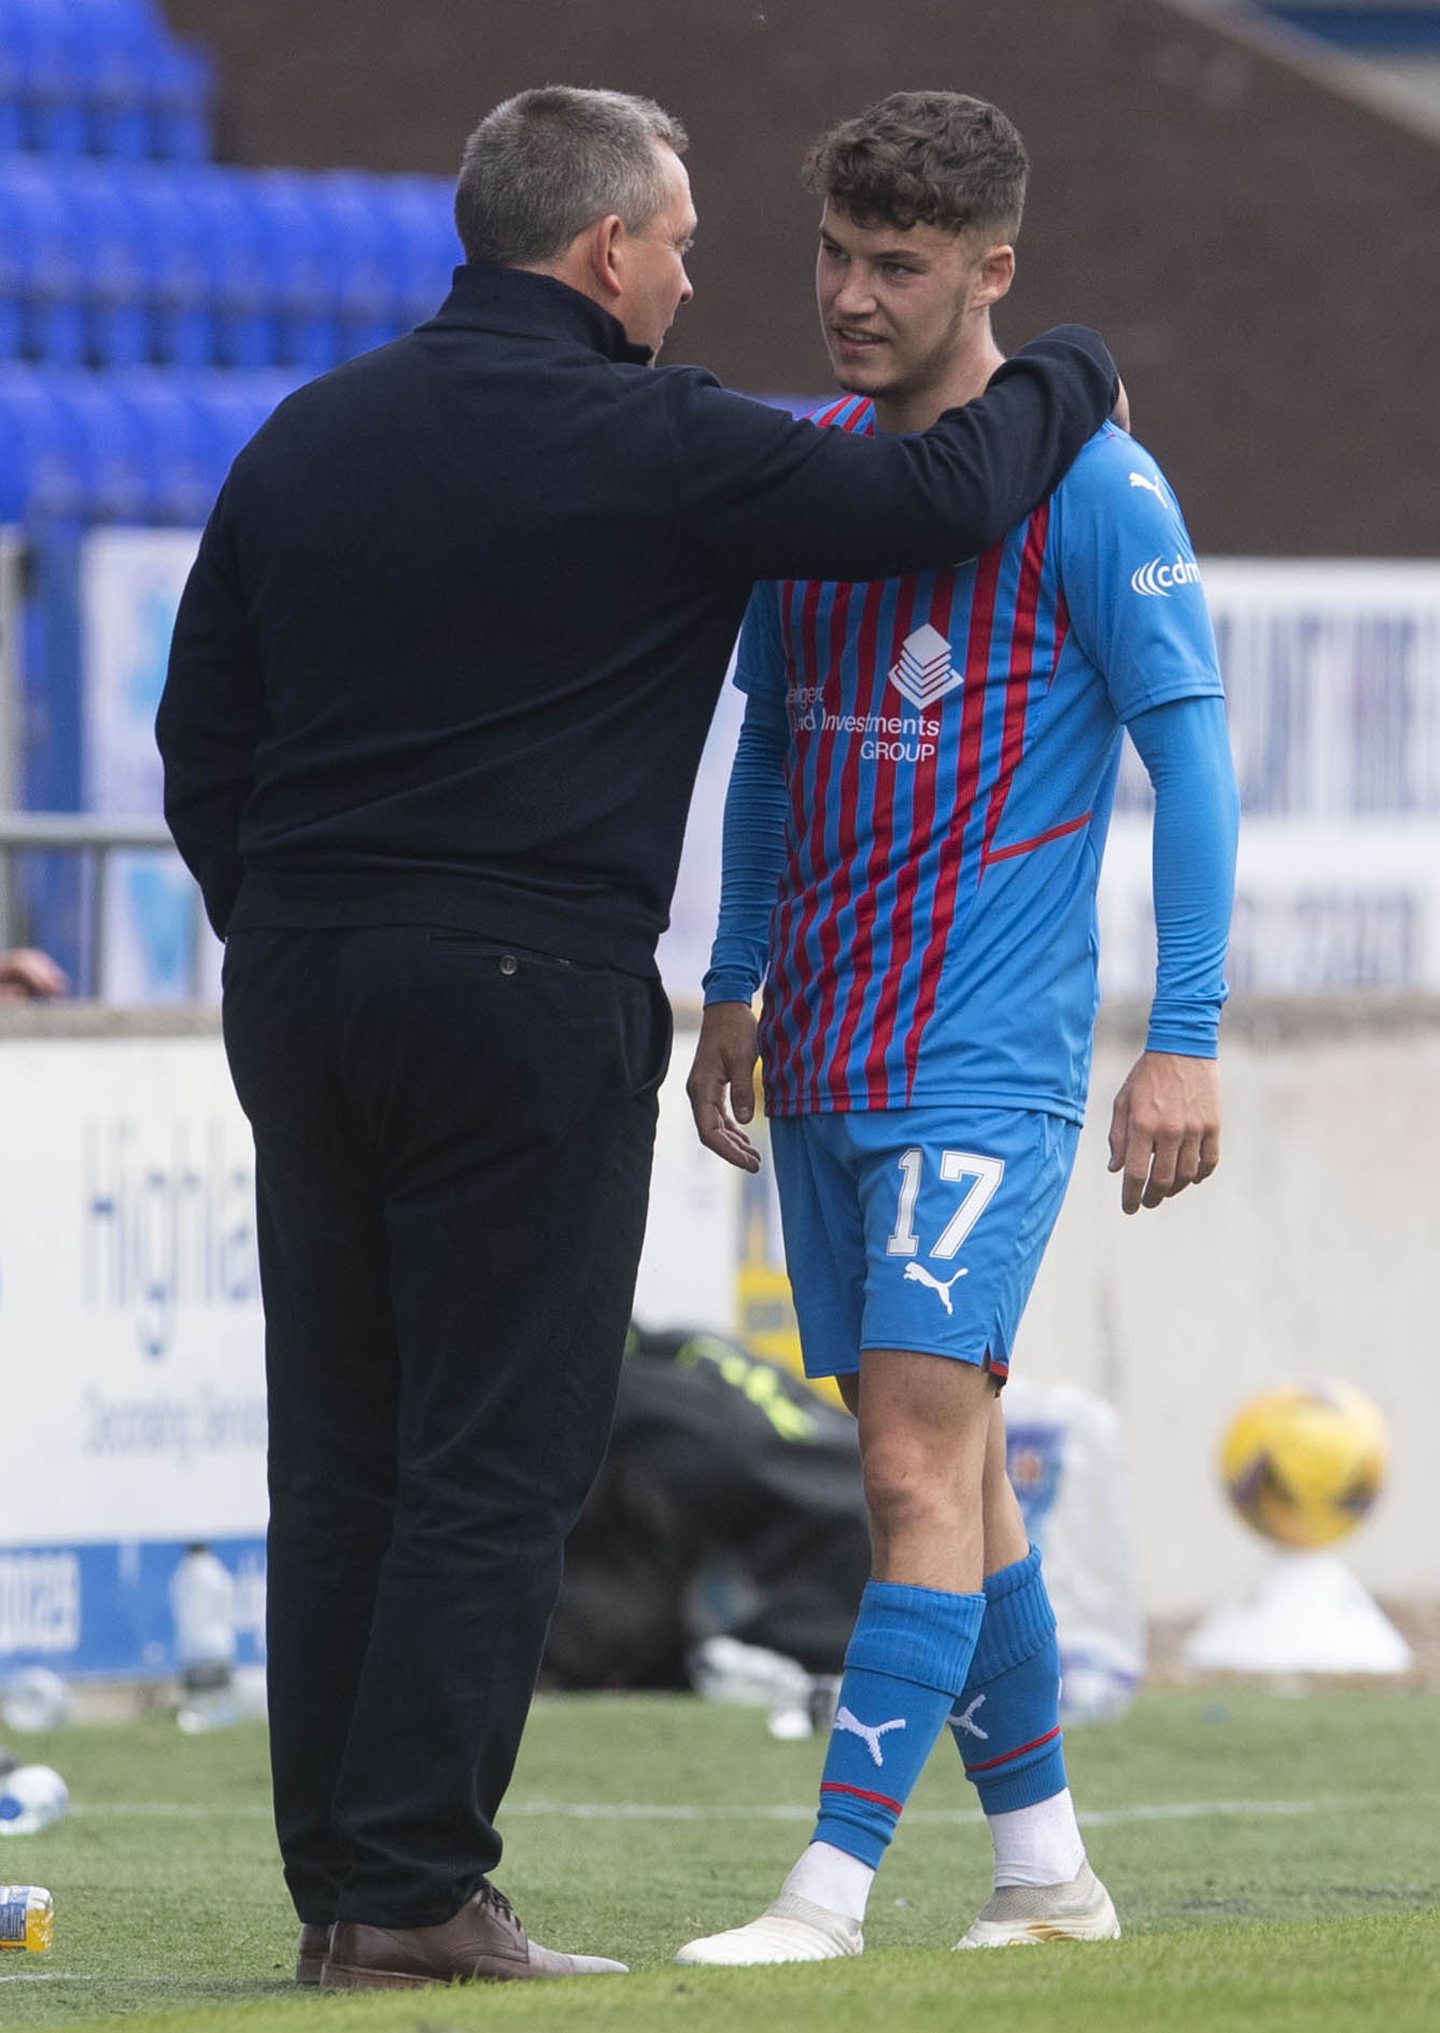 McDonald spent the first half of last season with Inverness in the Championship.